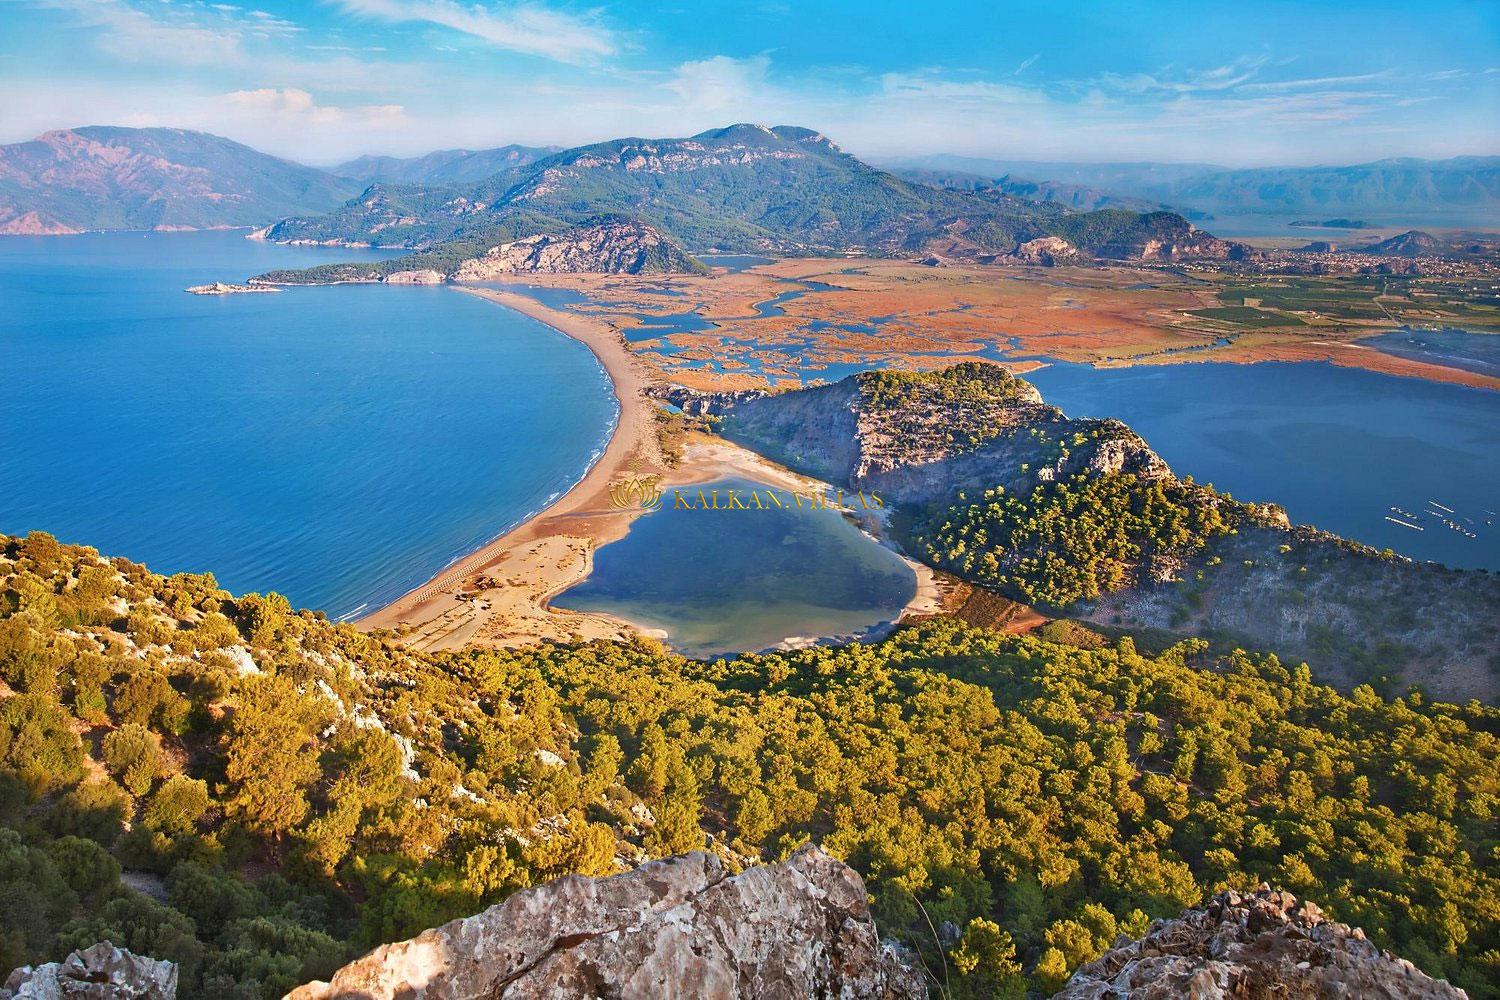 Holiday Destinations to Visit in Turkey